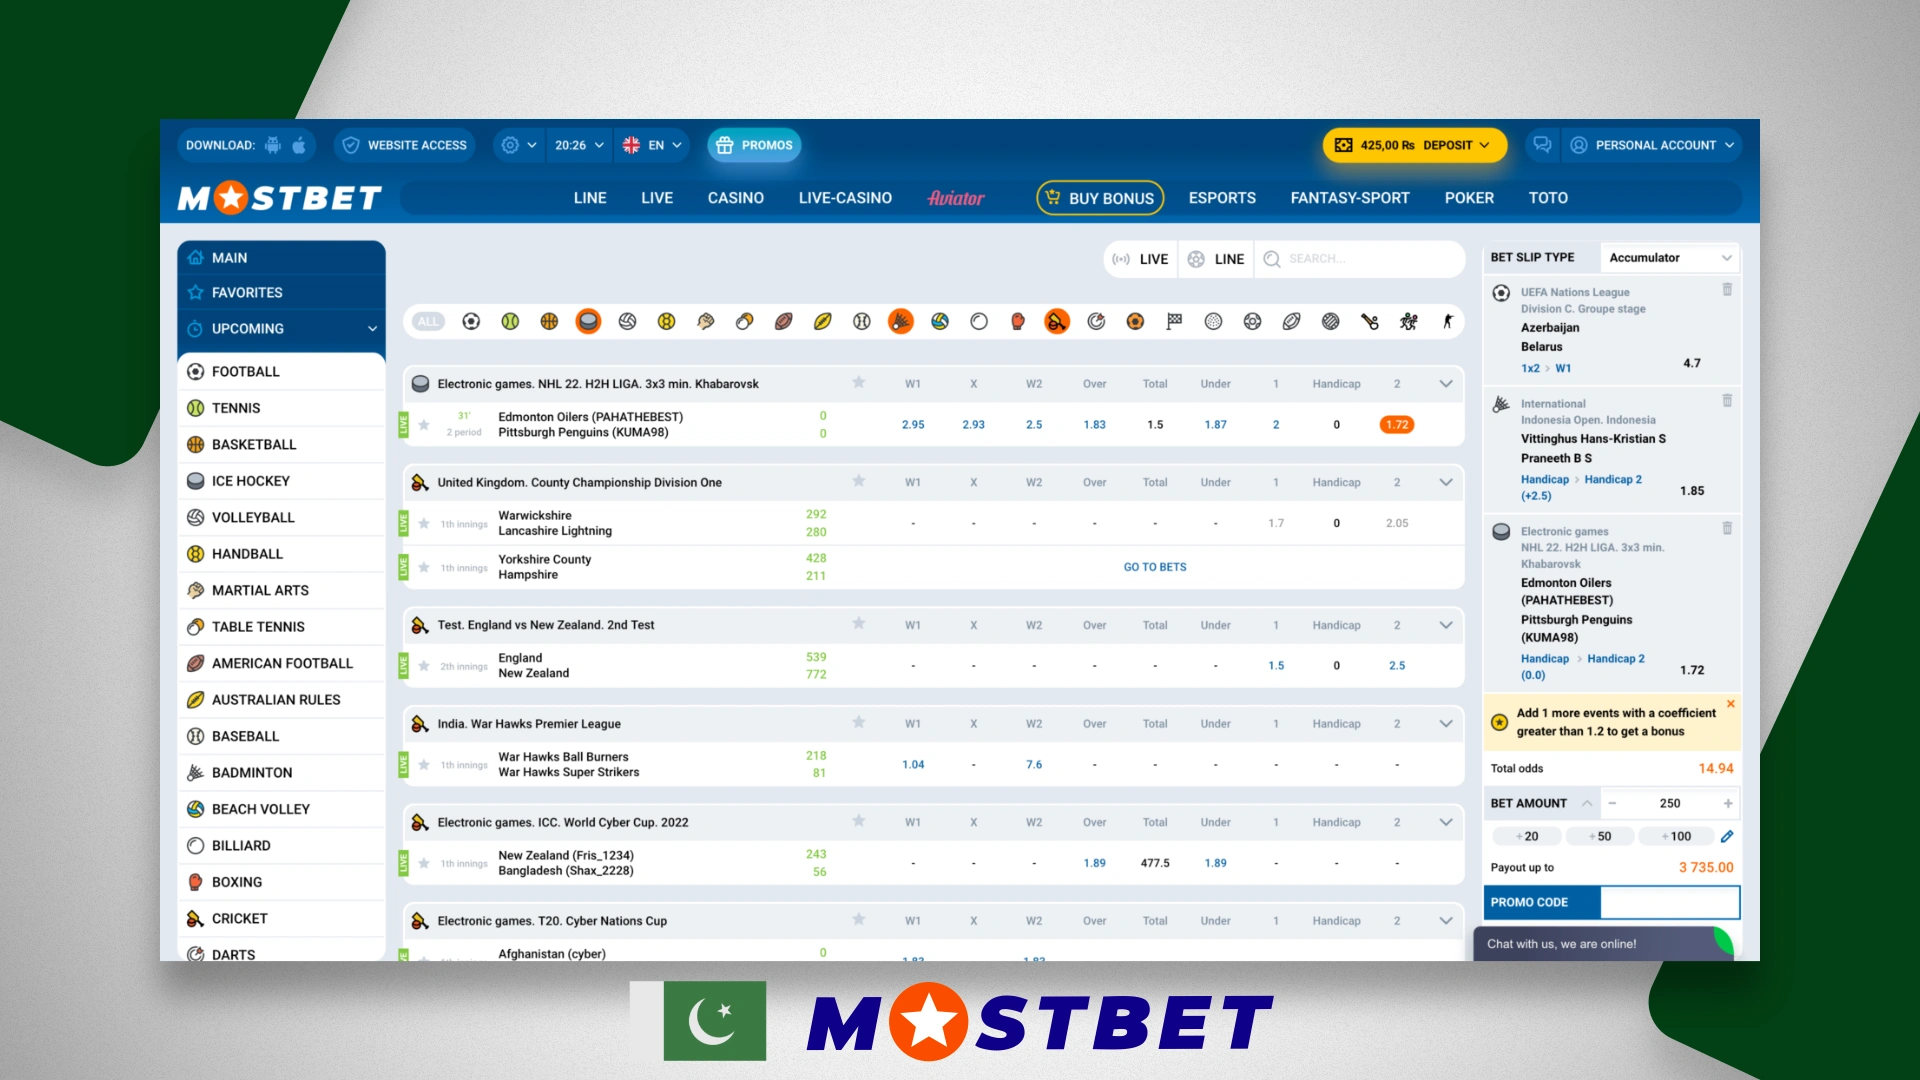 Types of bets on Mostbet website